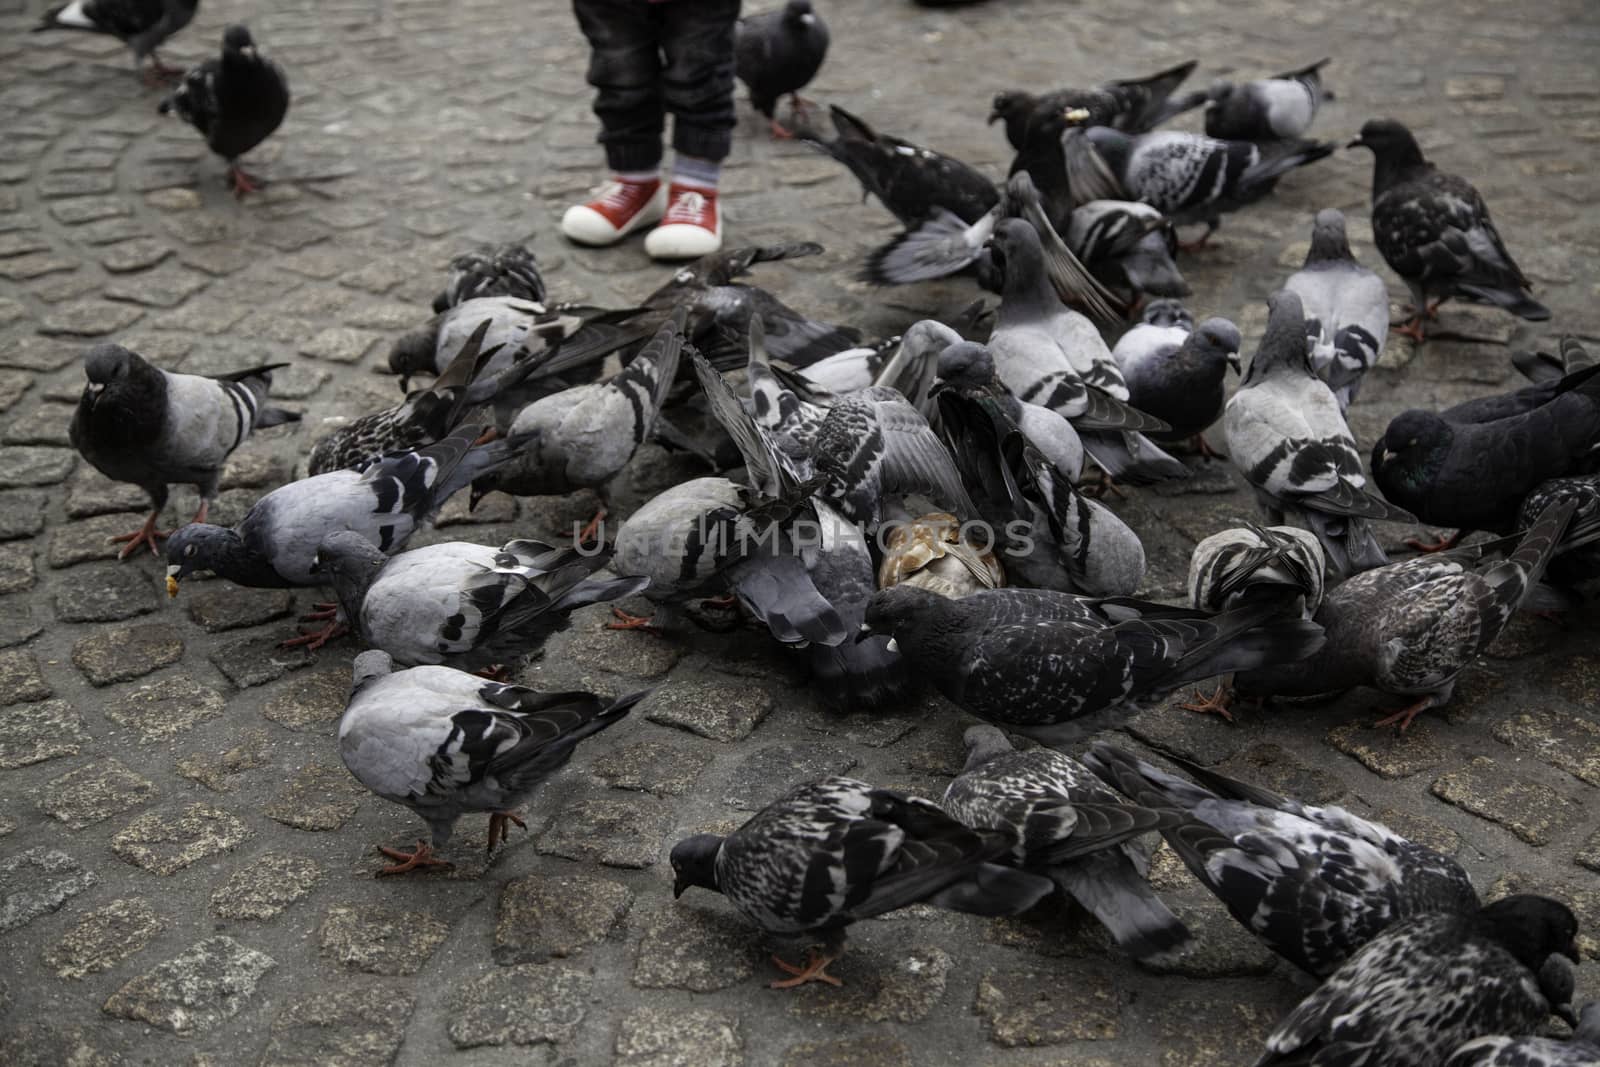 Pigeons in the square by esebene